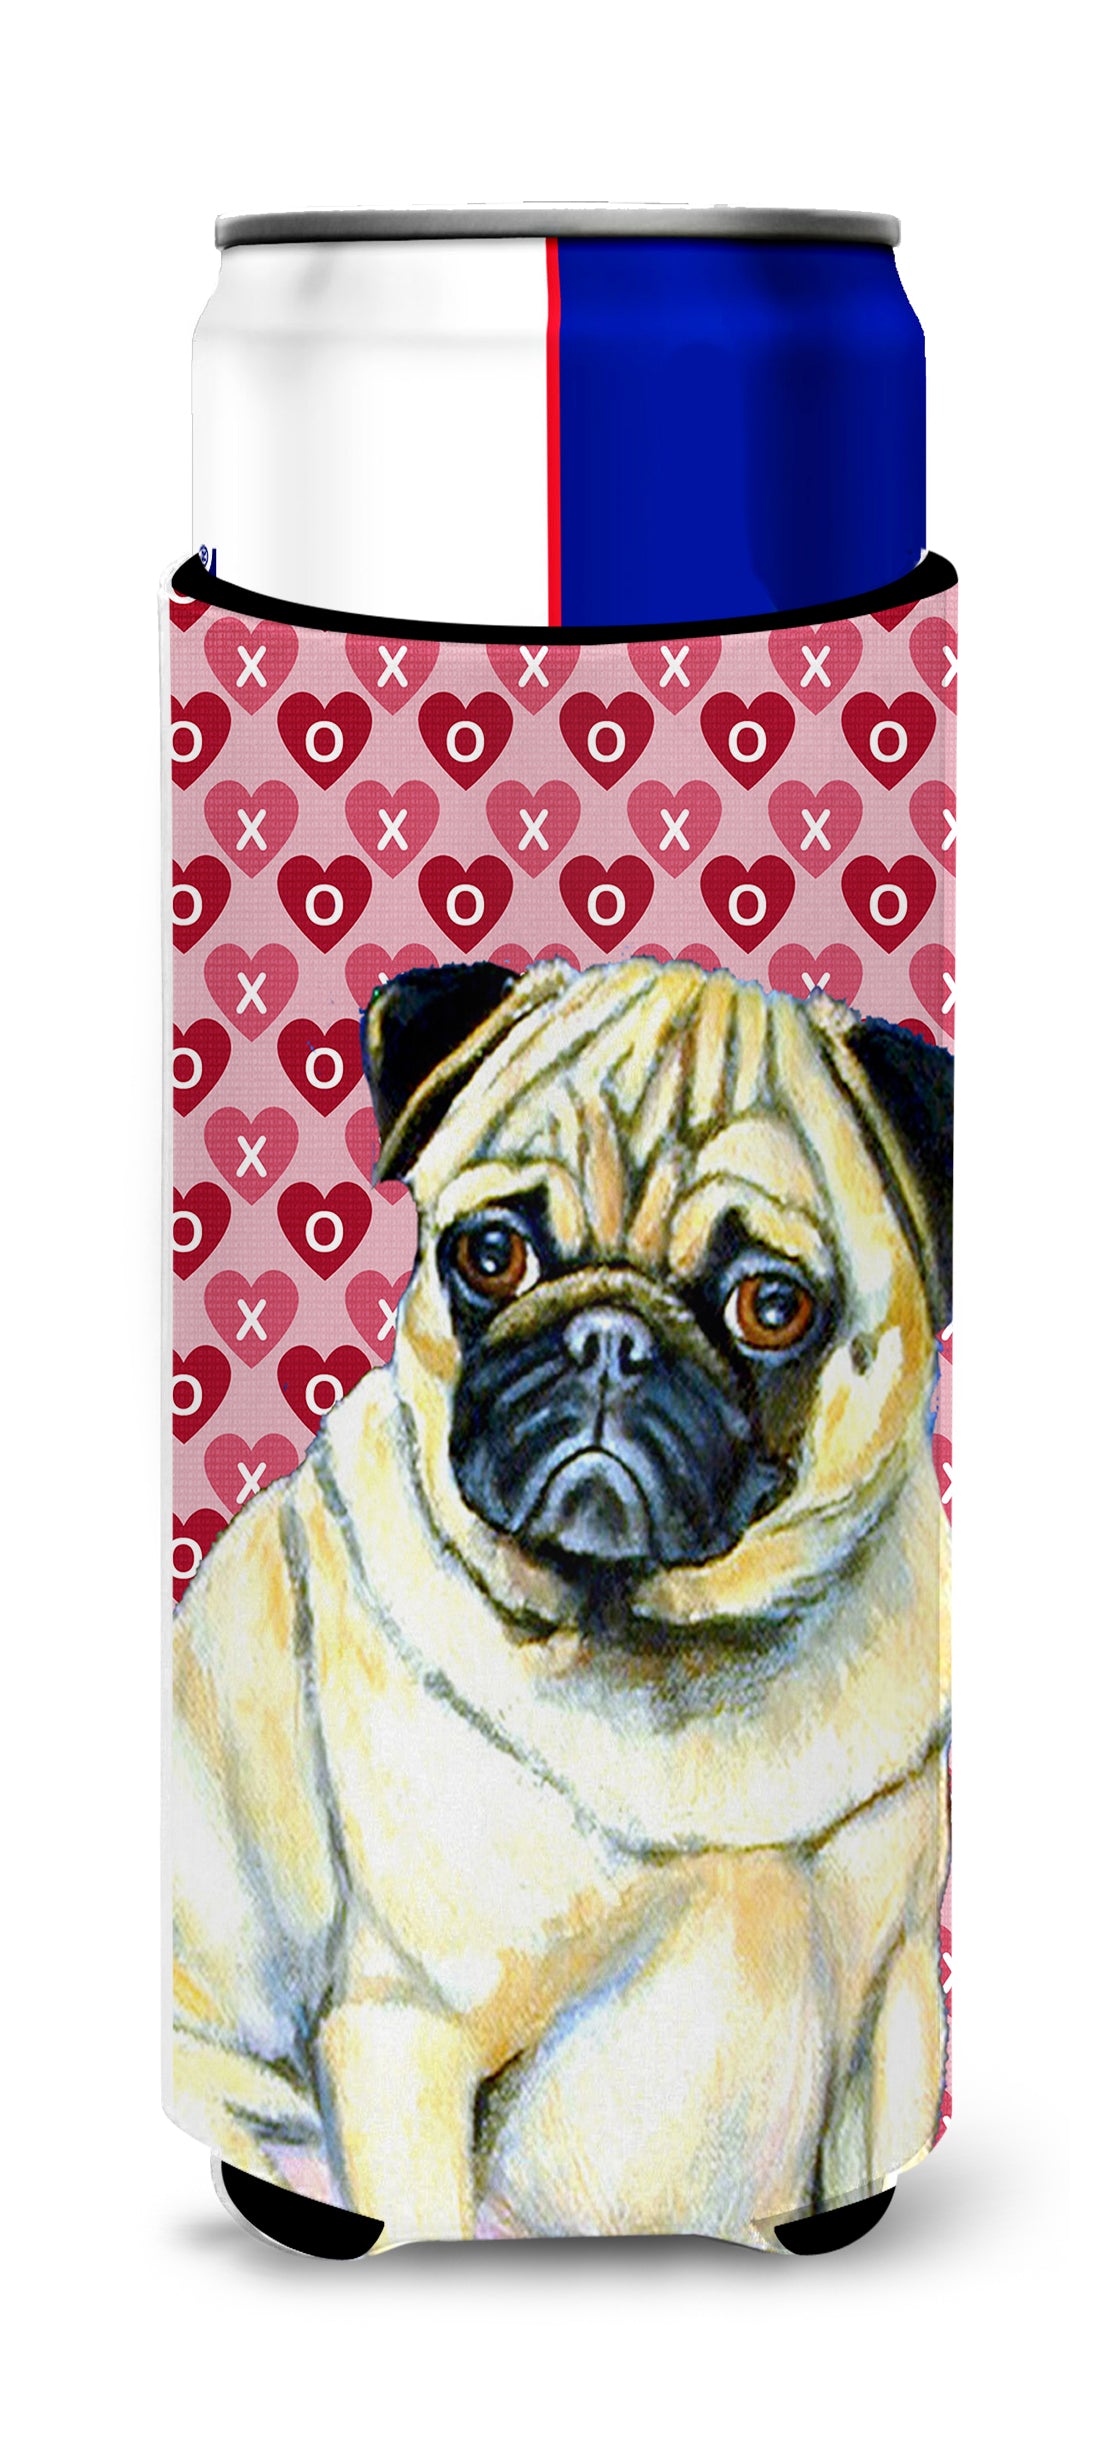 Pug Hearts Love and Valentine's Day Portrait Ultra Beverage Insulators for slim cans LH9162MUK.